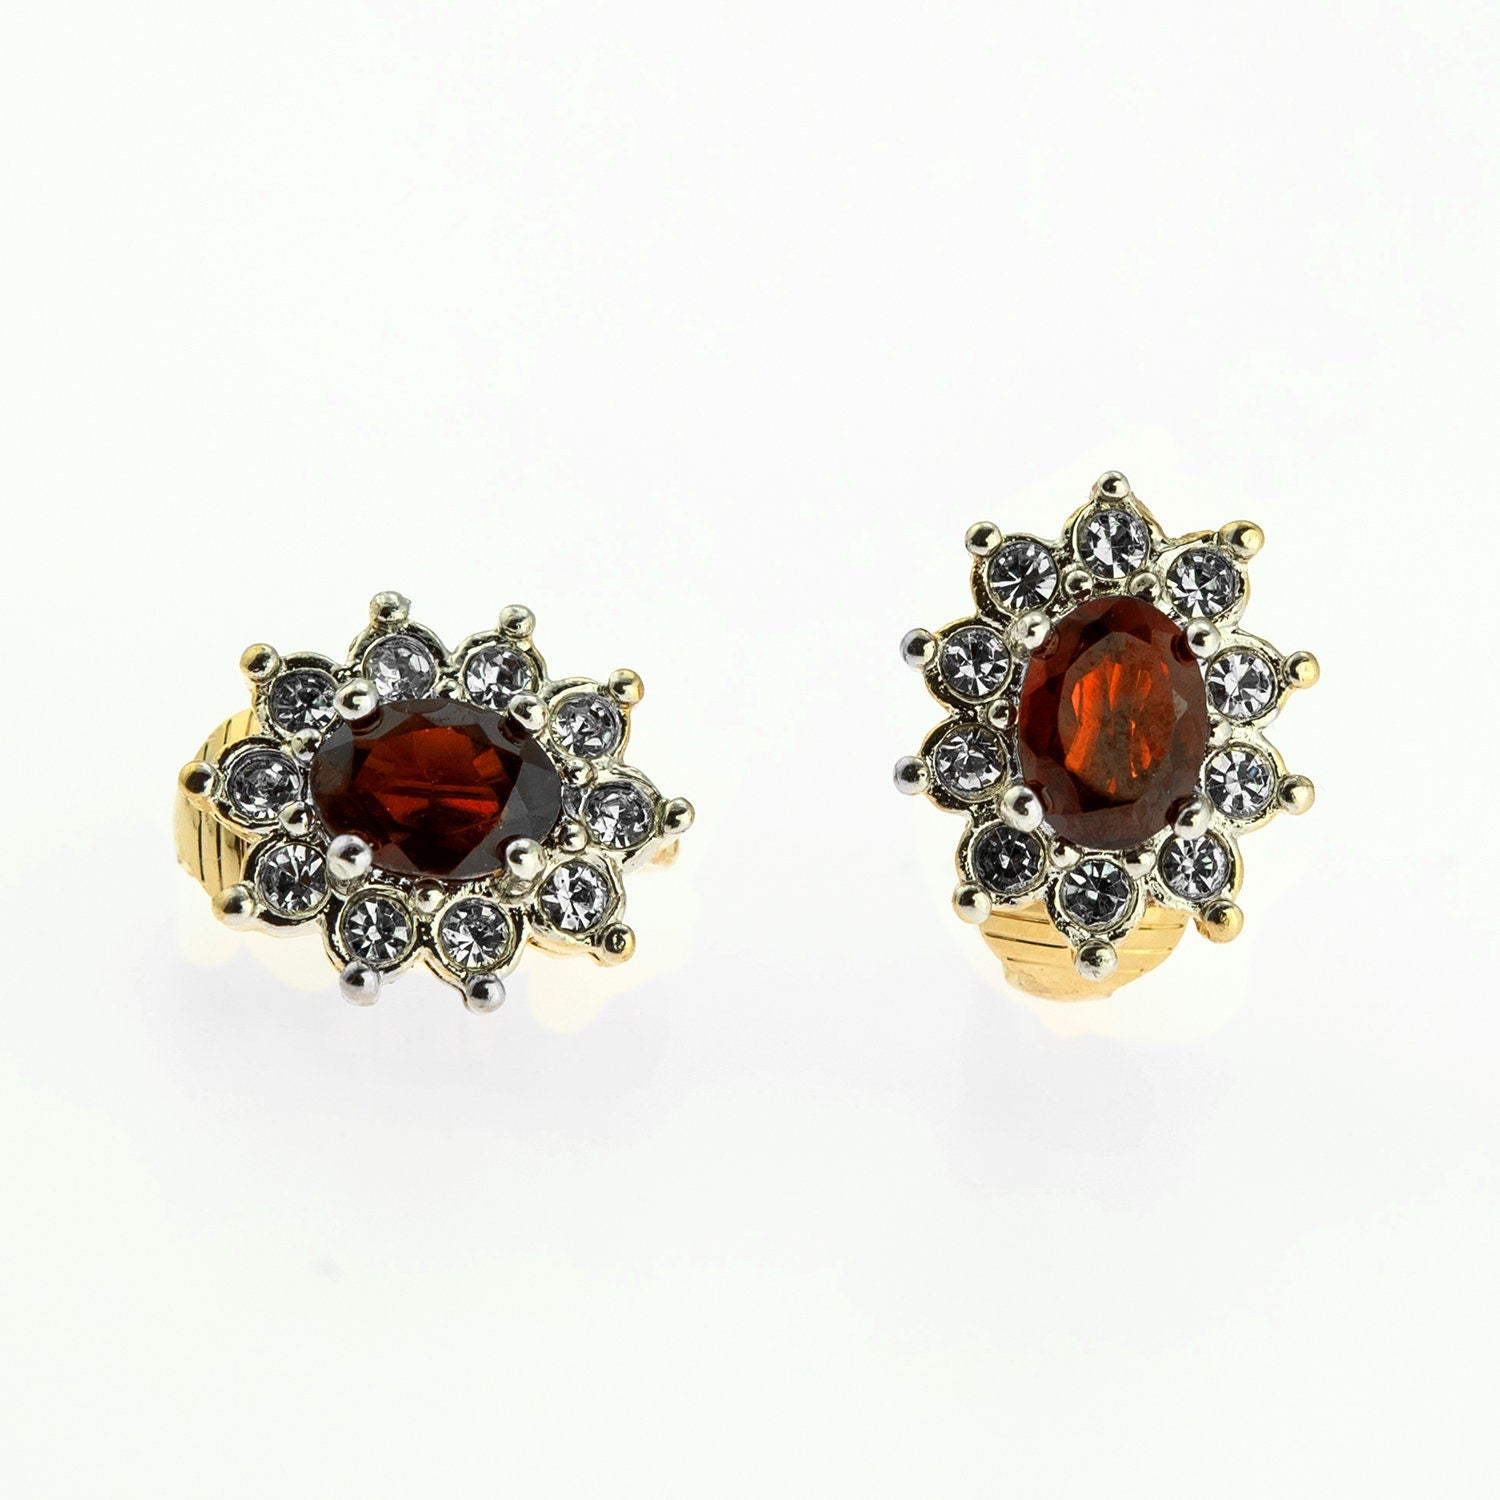 Vintage Earrings Genuine Garnet with Clear Swarovski Crystal Clip Earrings Antique Womans Jewelry E2950 - Limited Stock - Never Worn